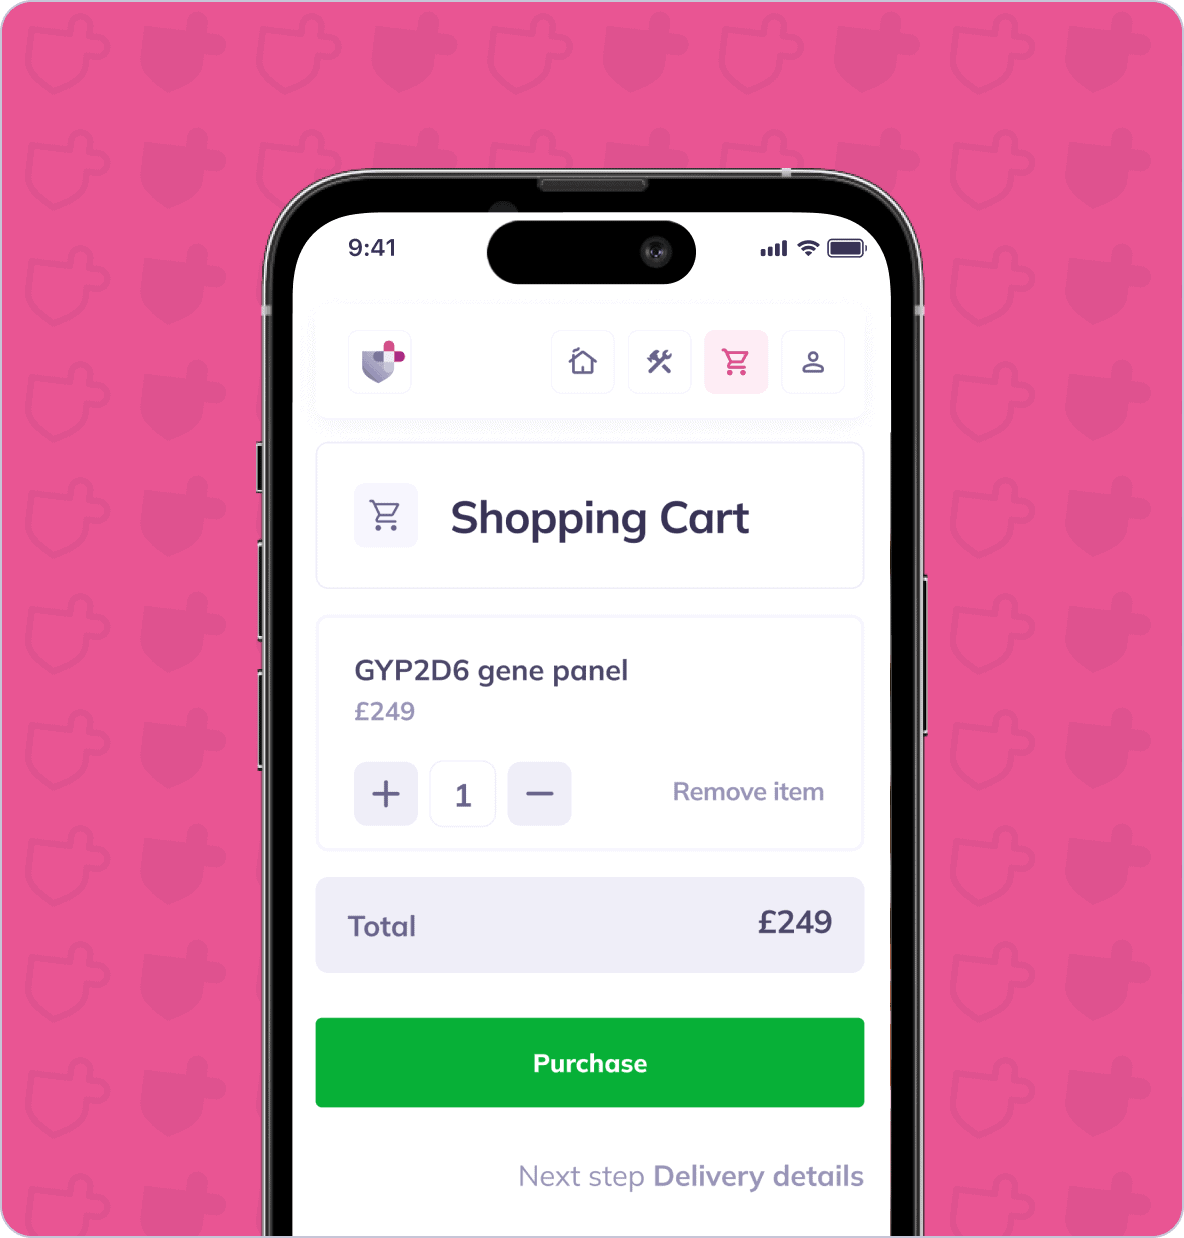 A smartphone screen displays a shopping cart for a GYP2D6 gene panel costing £249, with options to adjust quantity and remove item. A green "Purchase" button and "Next step Delivery details" are shown below.